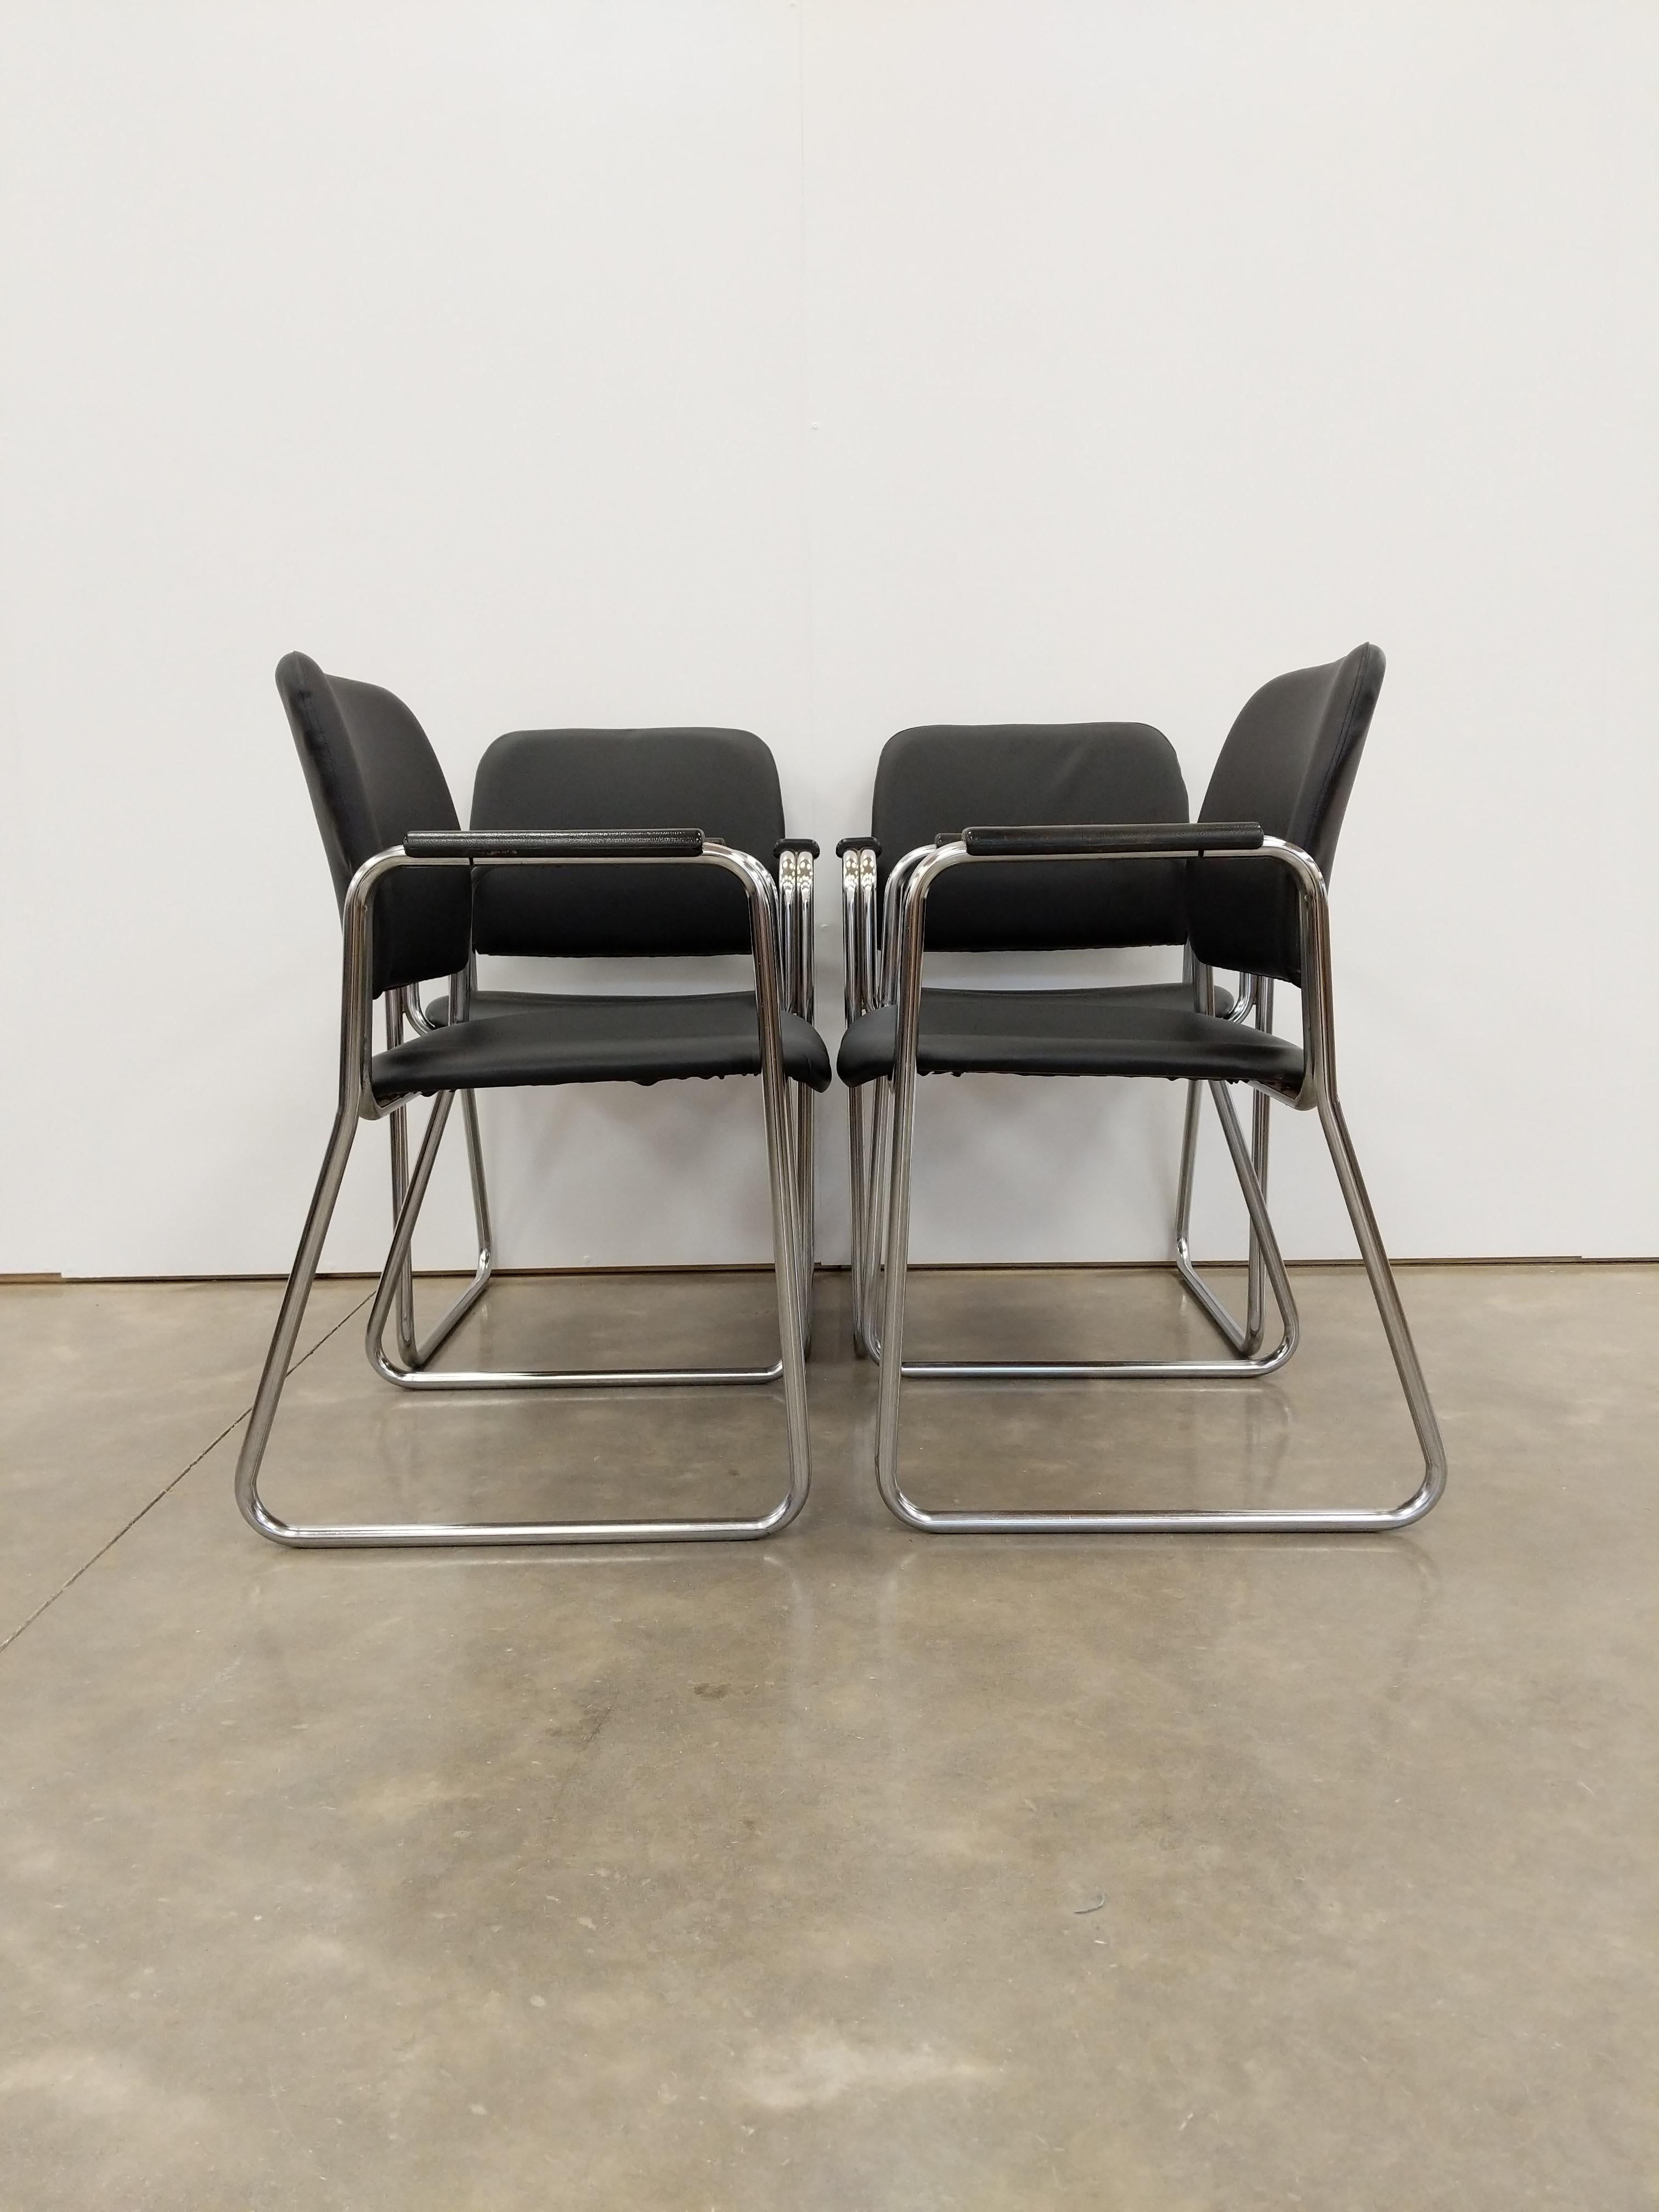 Set of 4 authentic vintage mid century modern Czech chairs.

We can break this set up into pairs if you only want 2 chairs, just contact us.

This set is in great vintage condition with brand new upholstery and very few signs of age-related wear